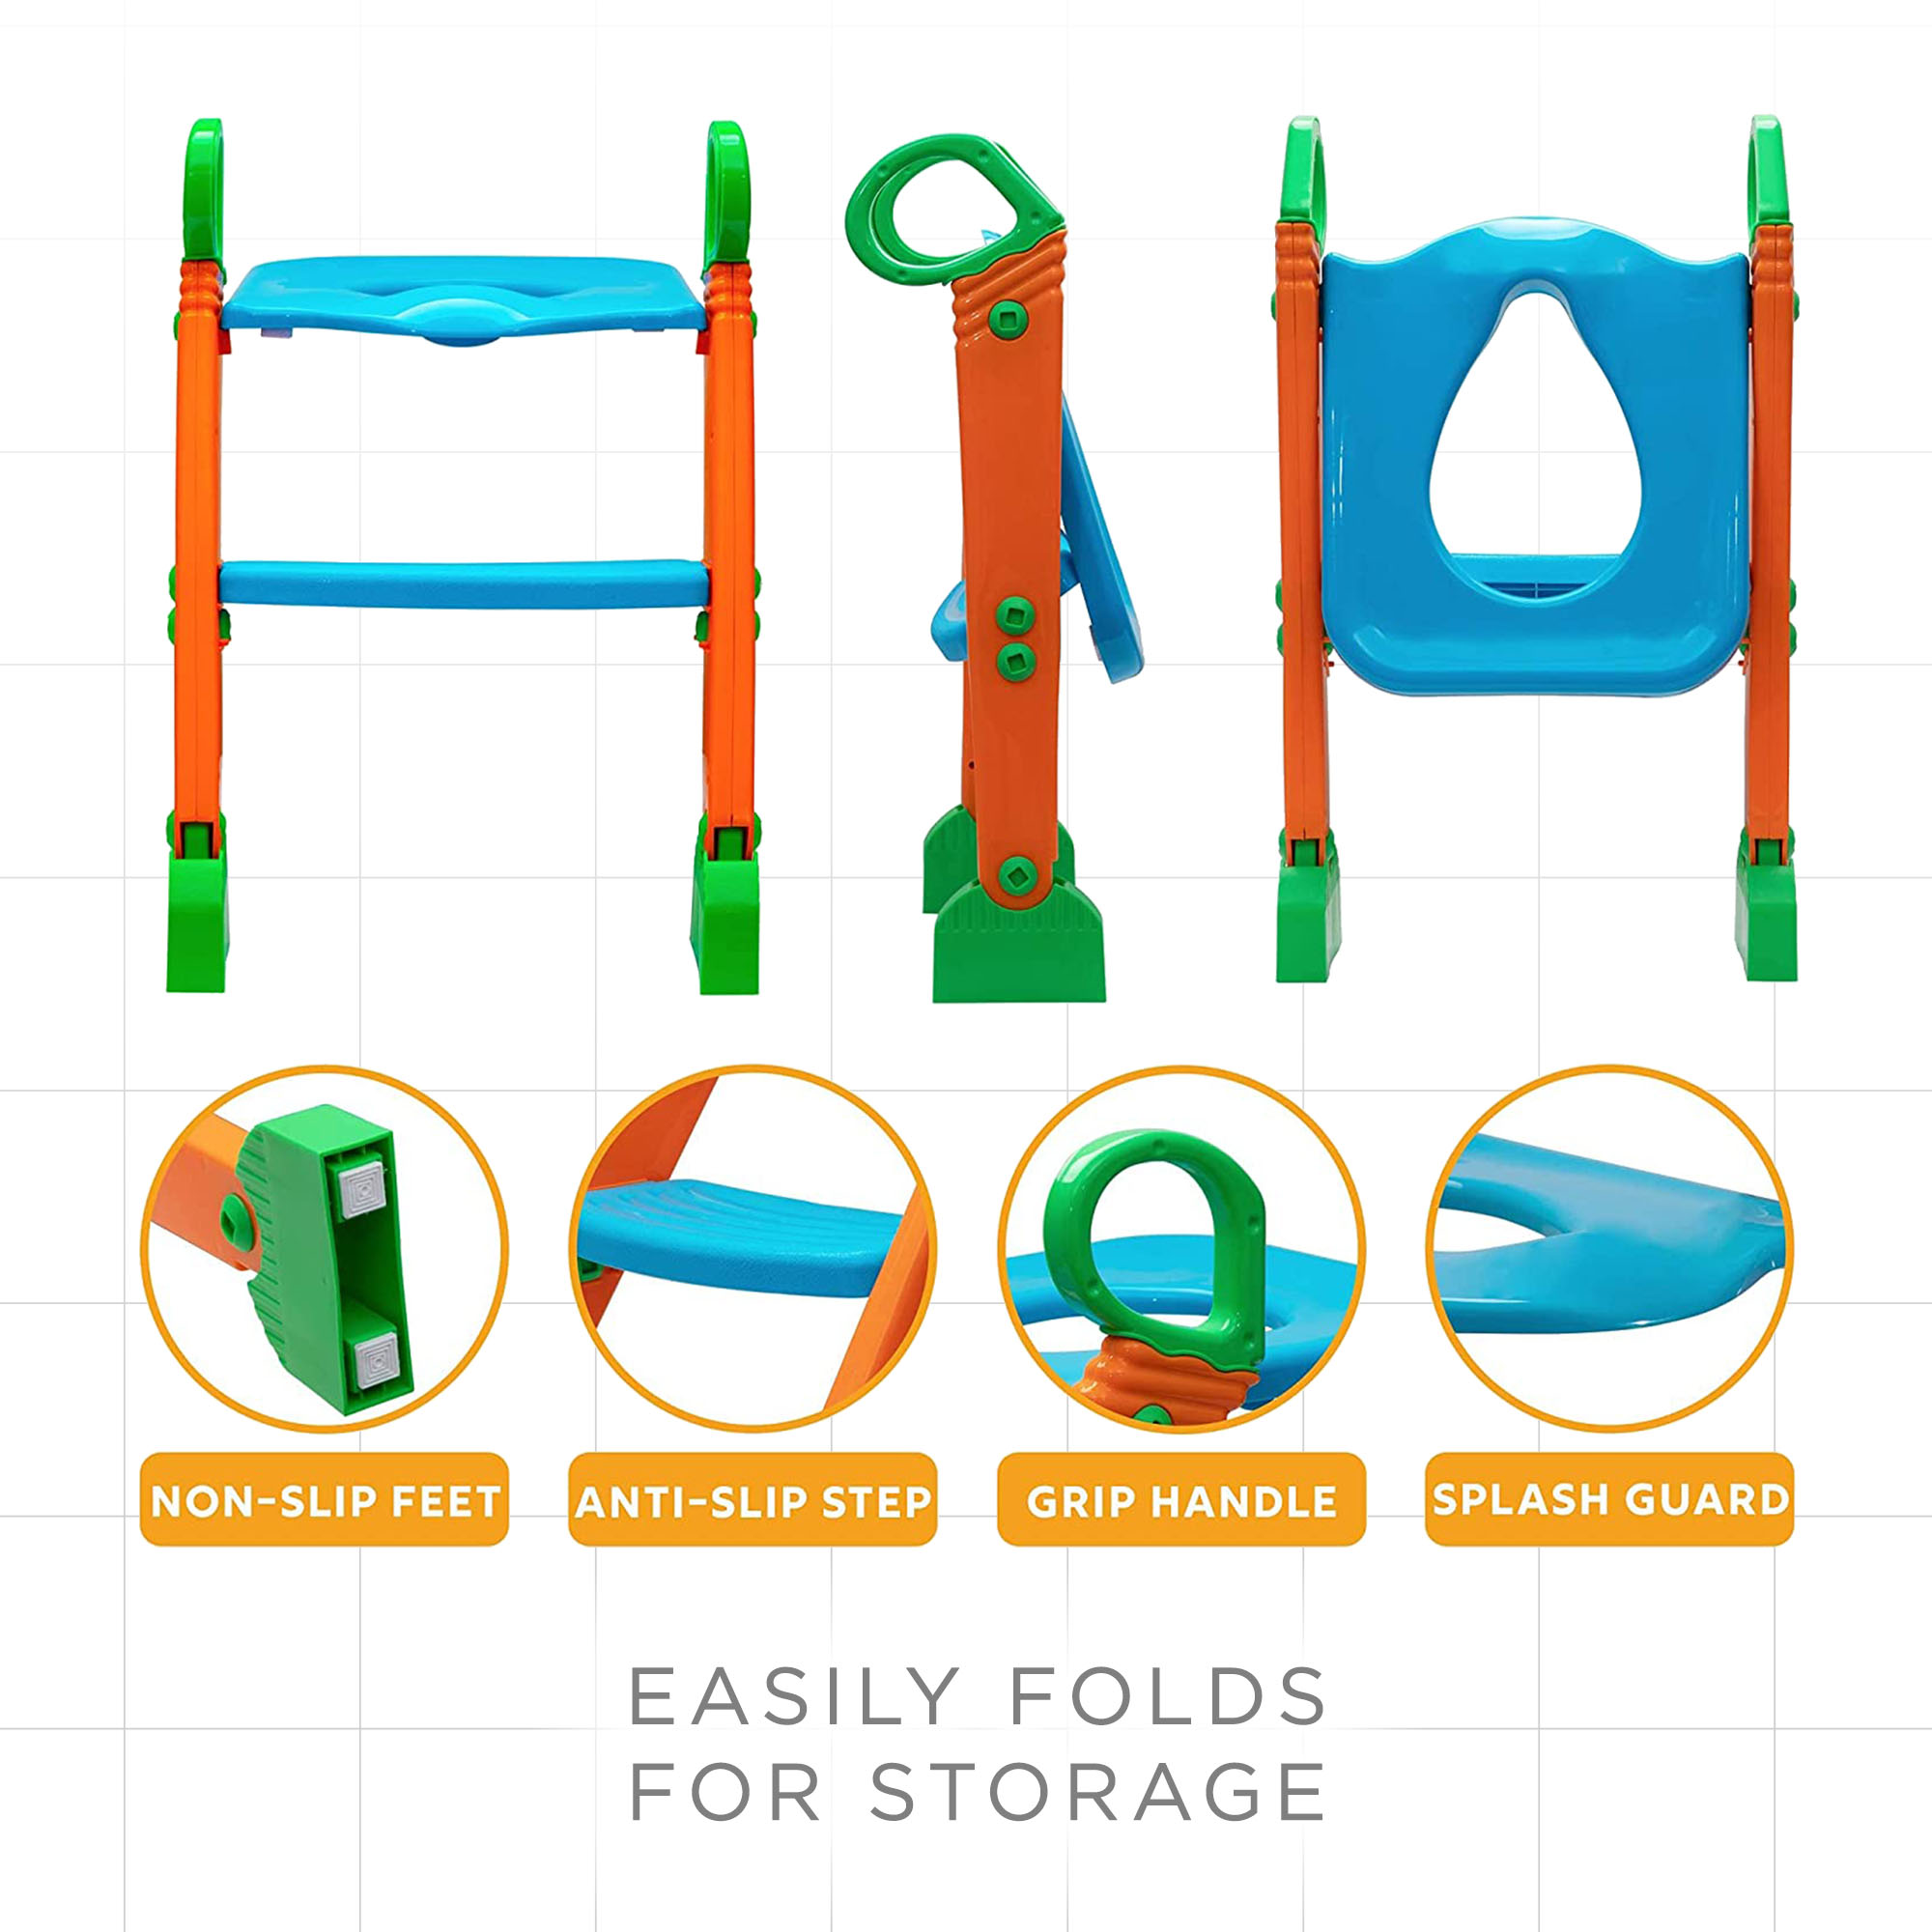 Kazoo Kids Foldable Potty Training Seat with Ladder for Toddlers Unisex - image 5 of 7